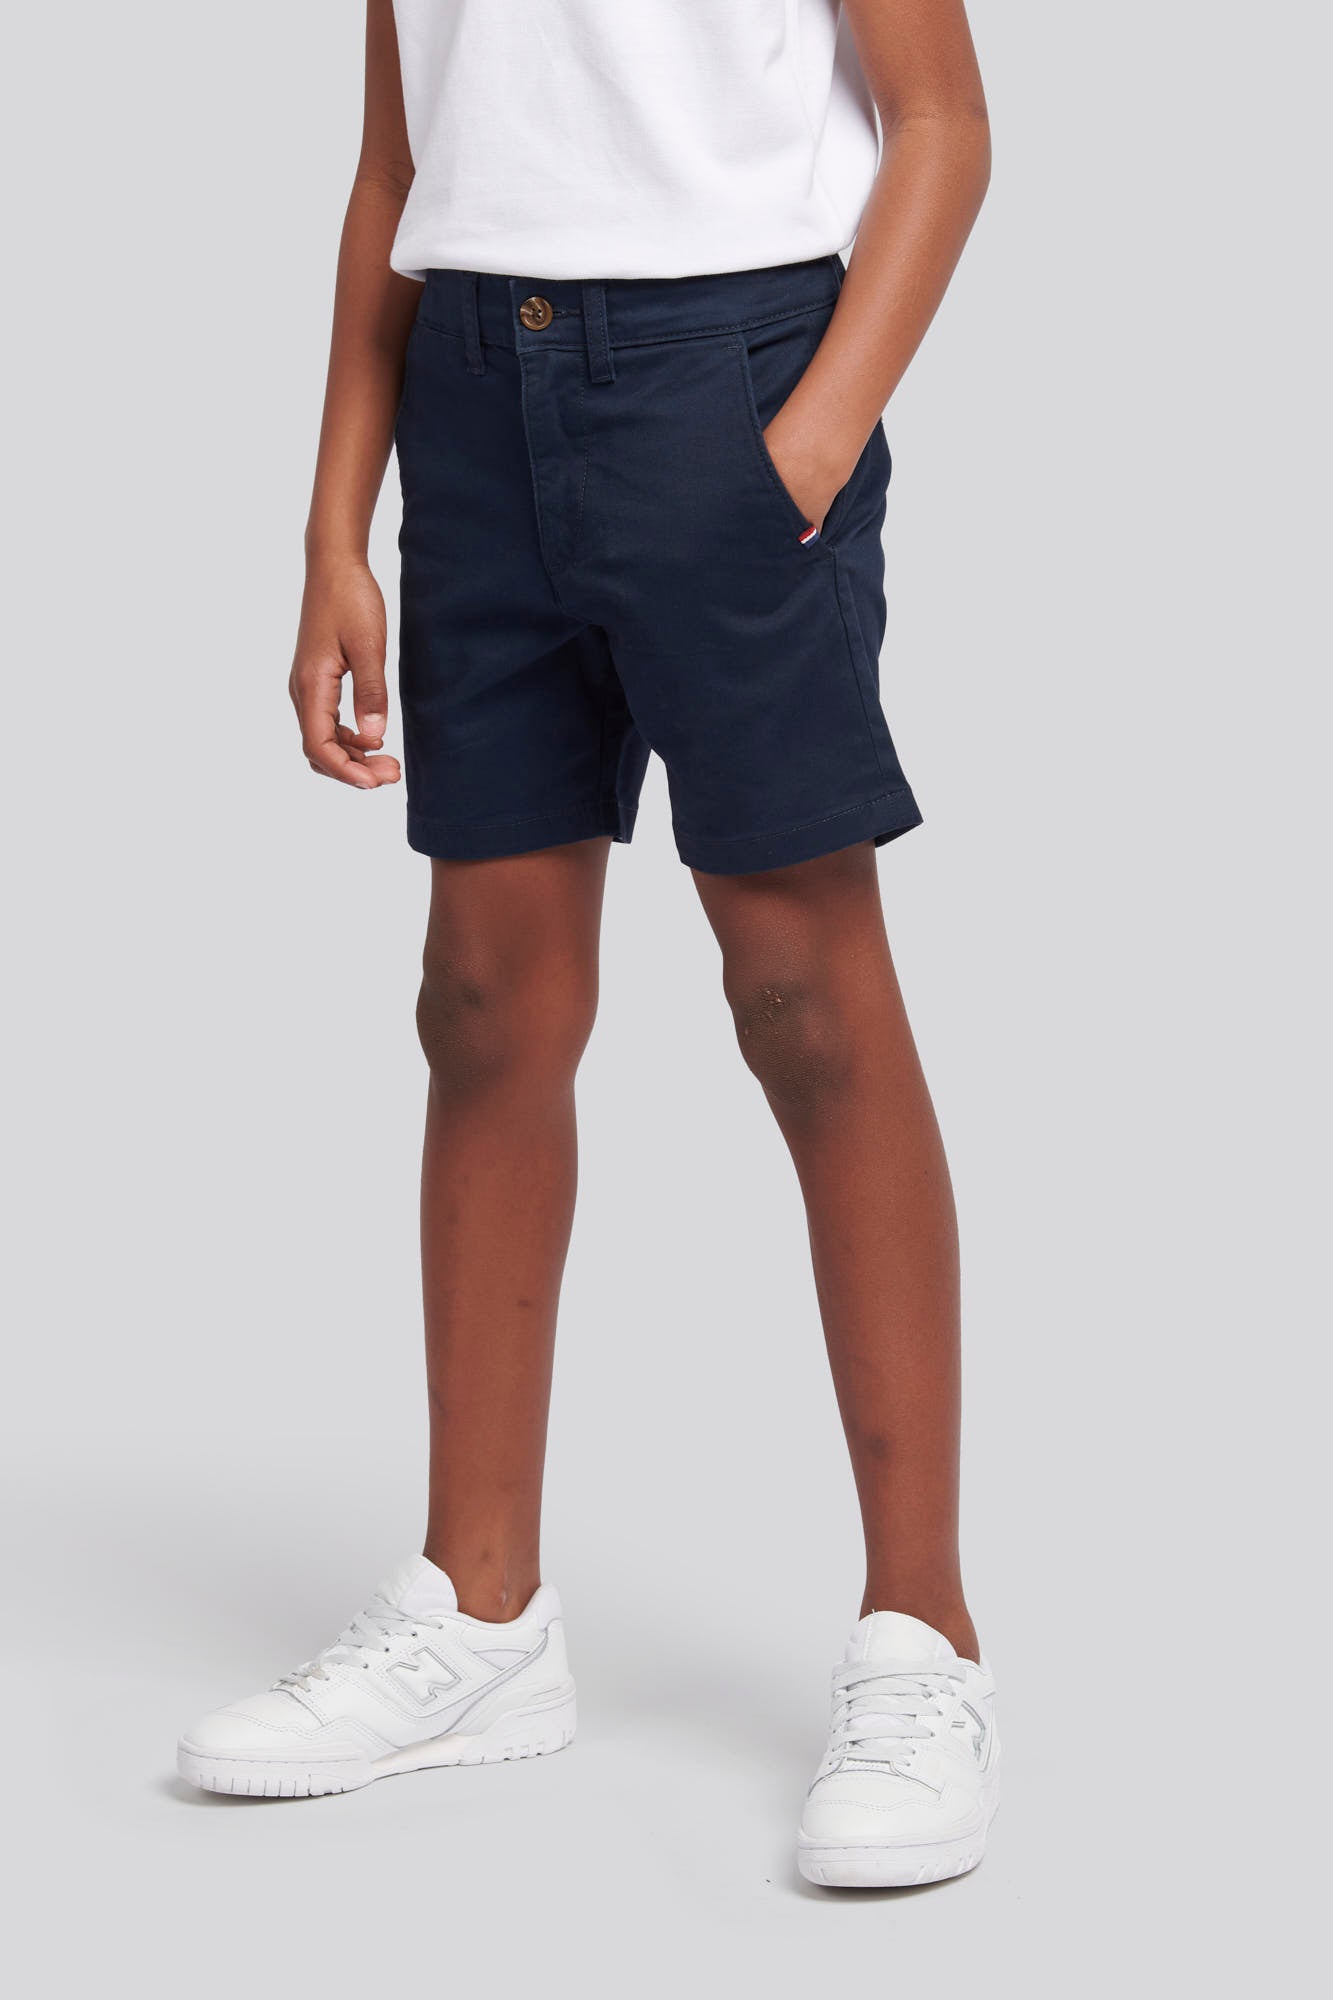 U.S. Polo Assn. Boys Classic Chino Shorts in Dark Sapphire Navy / Haute Red DHM